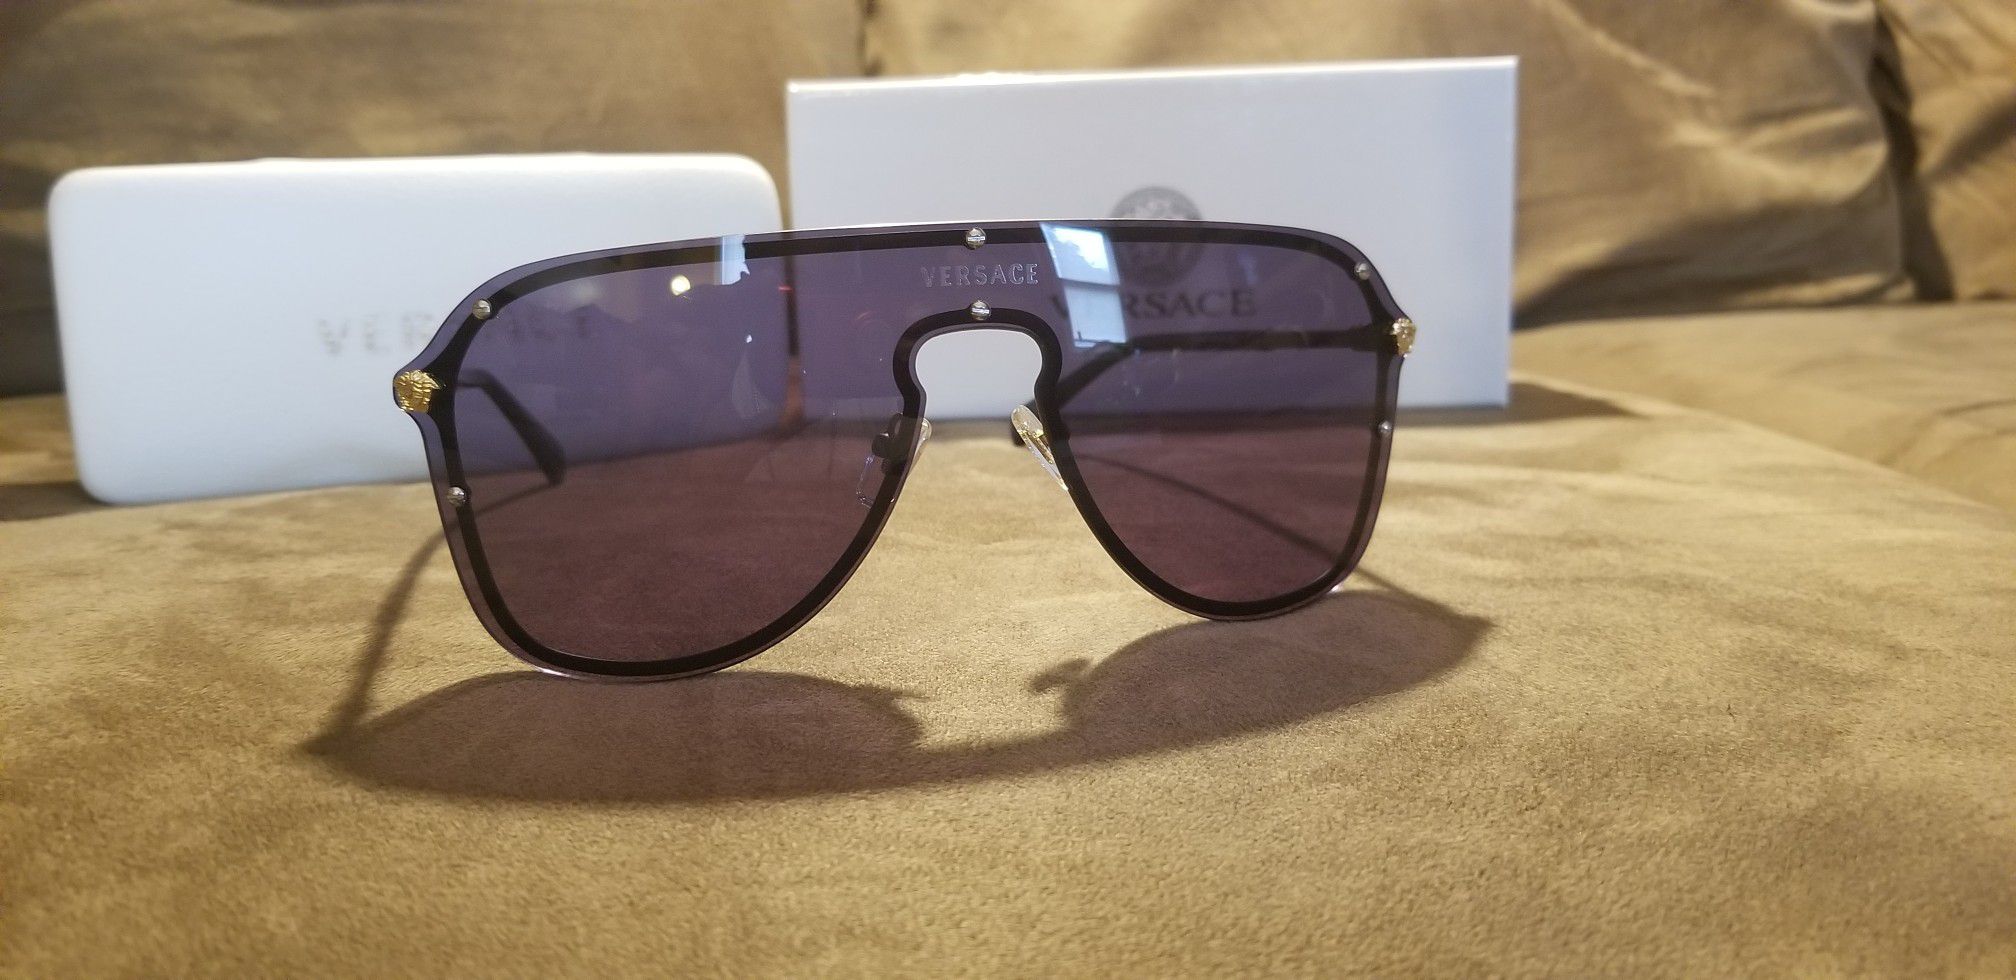 Versace Sunglasses OVE2180(Unisex) for Sale in FL - OfferUp